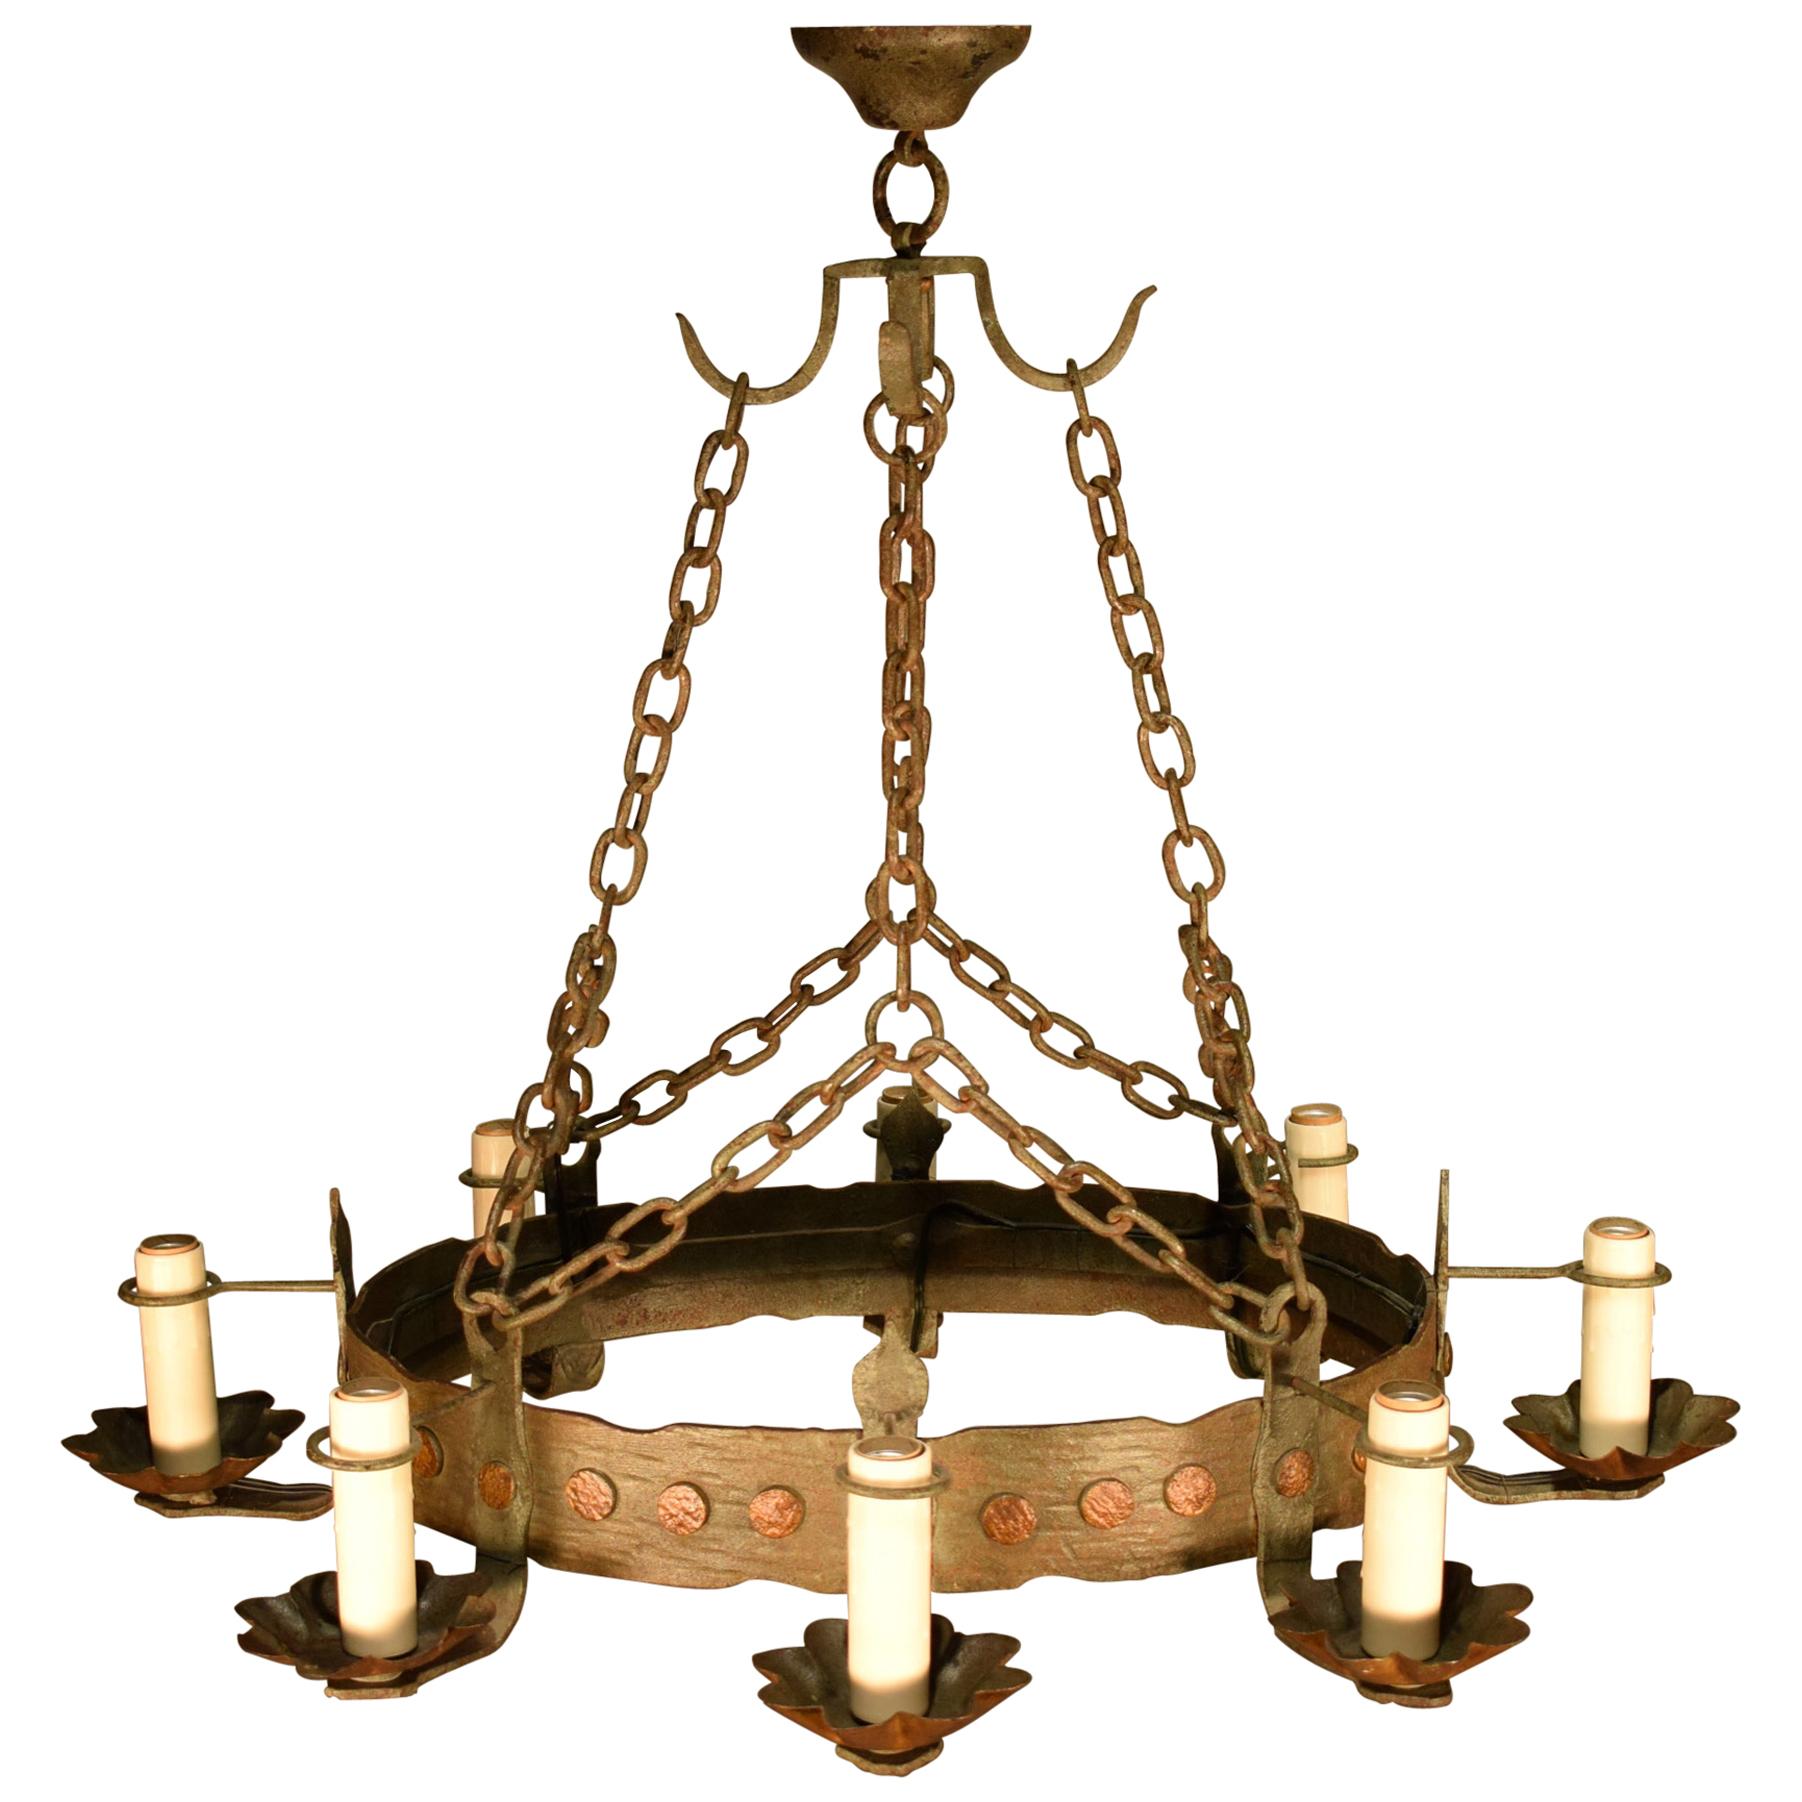 Very Fine Oval Iron Chandelier in the Tudor Style